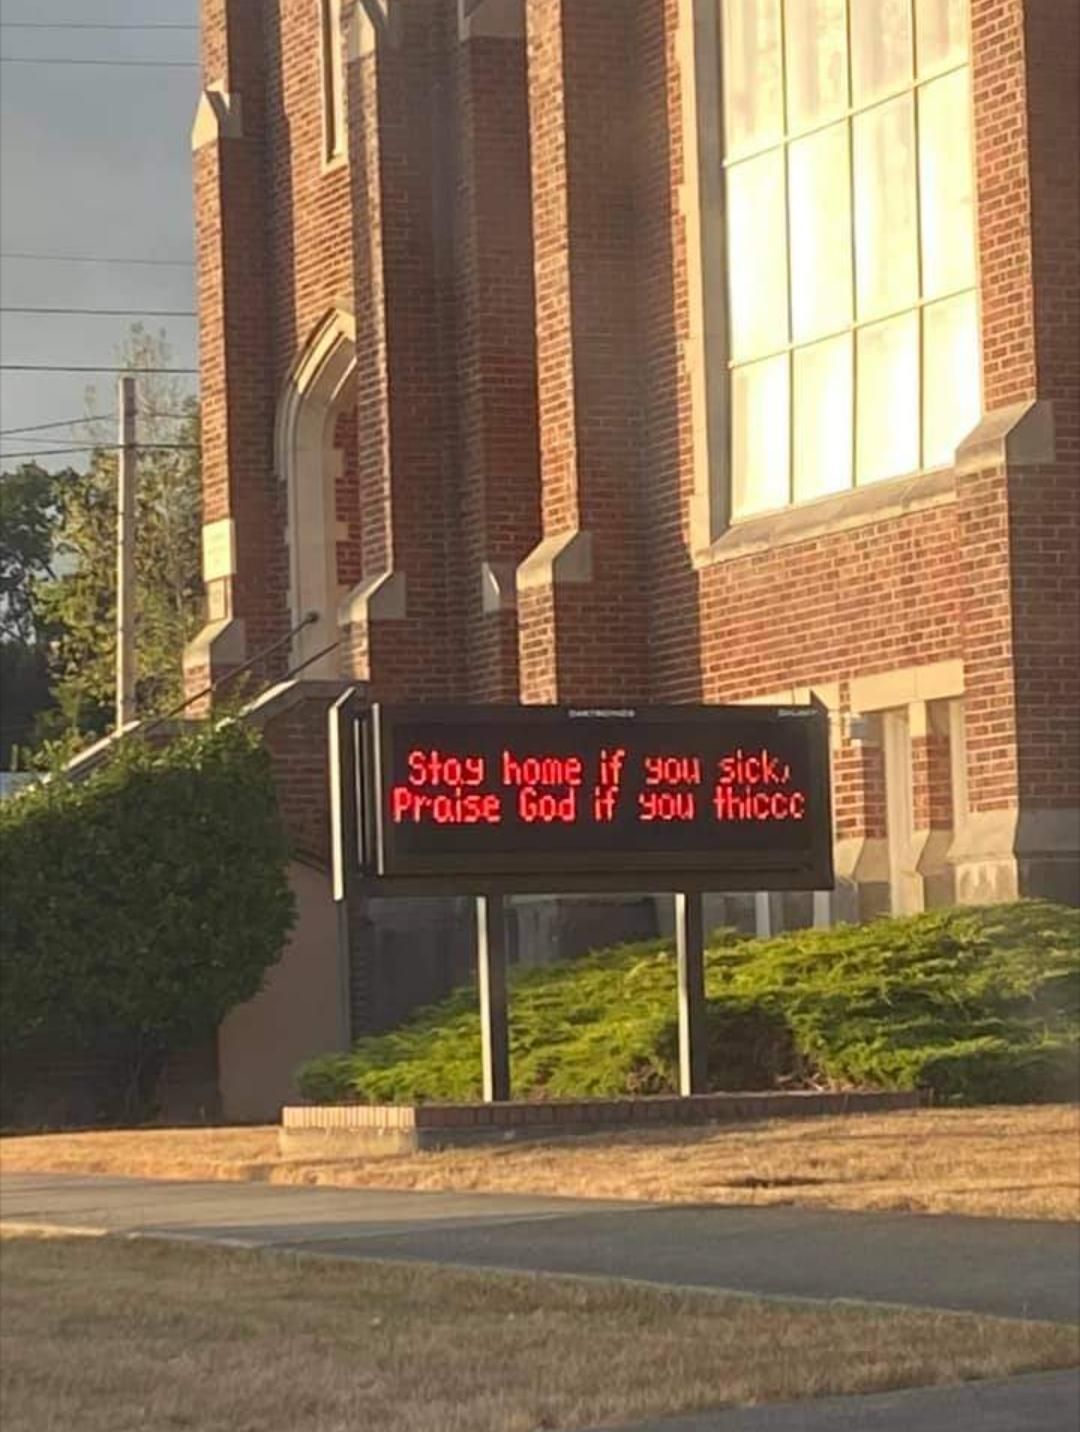 A church sign in my town